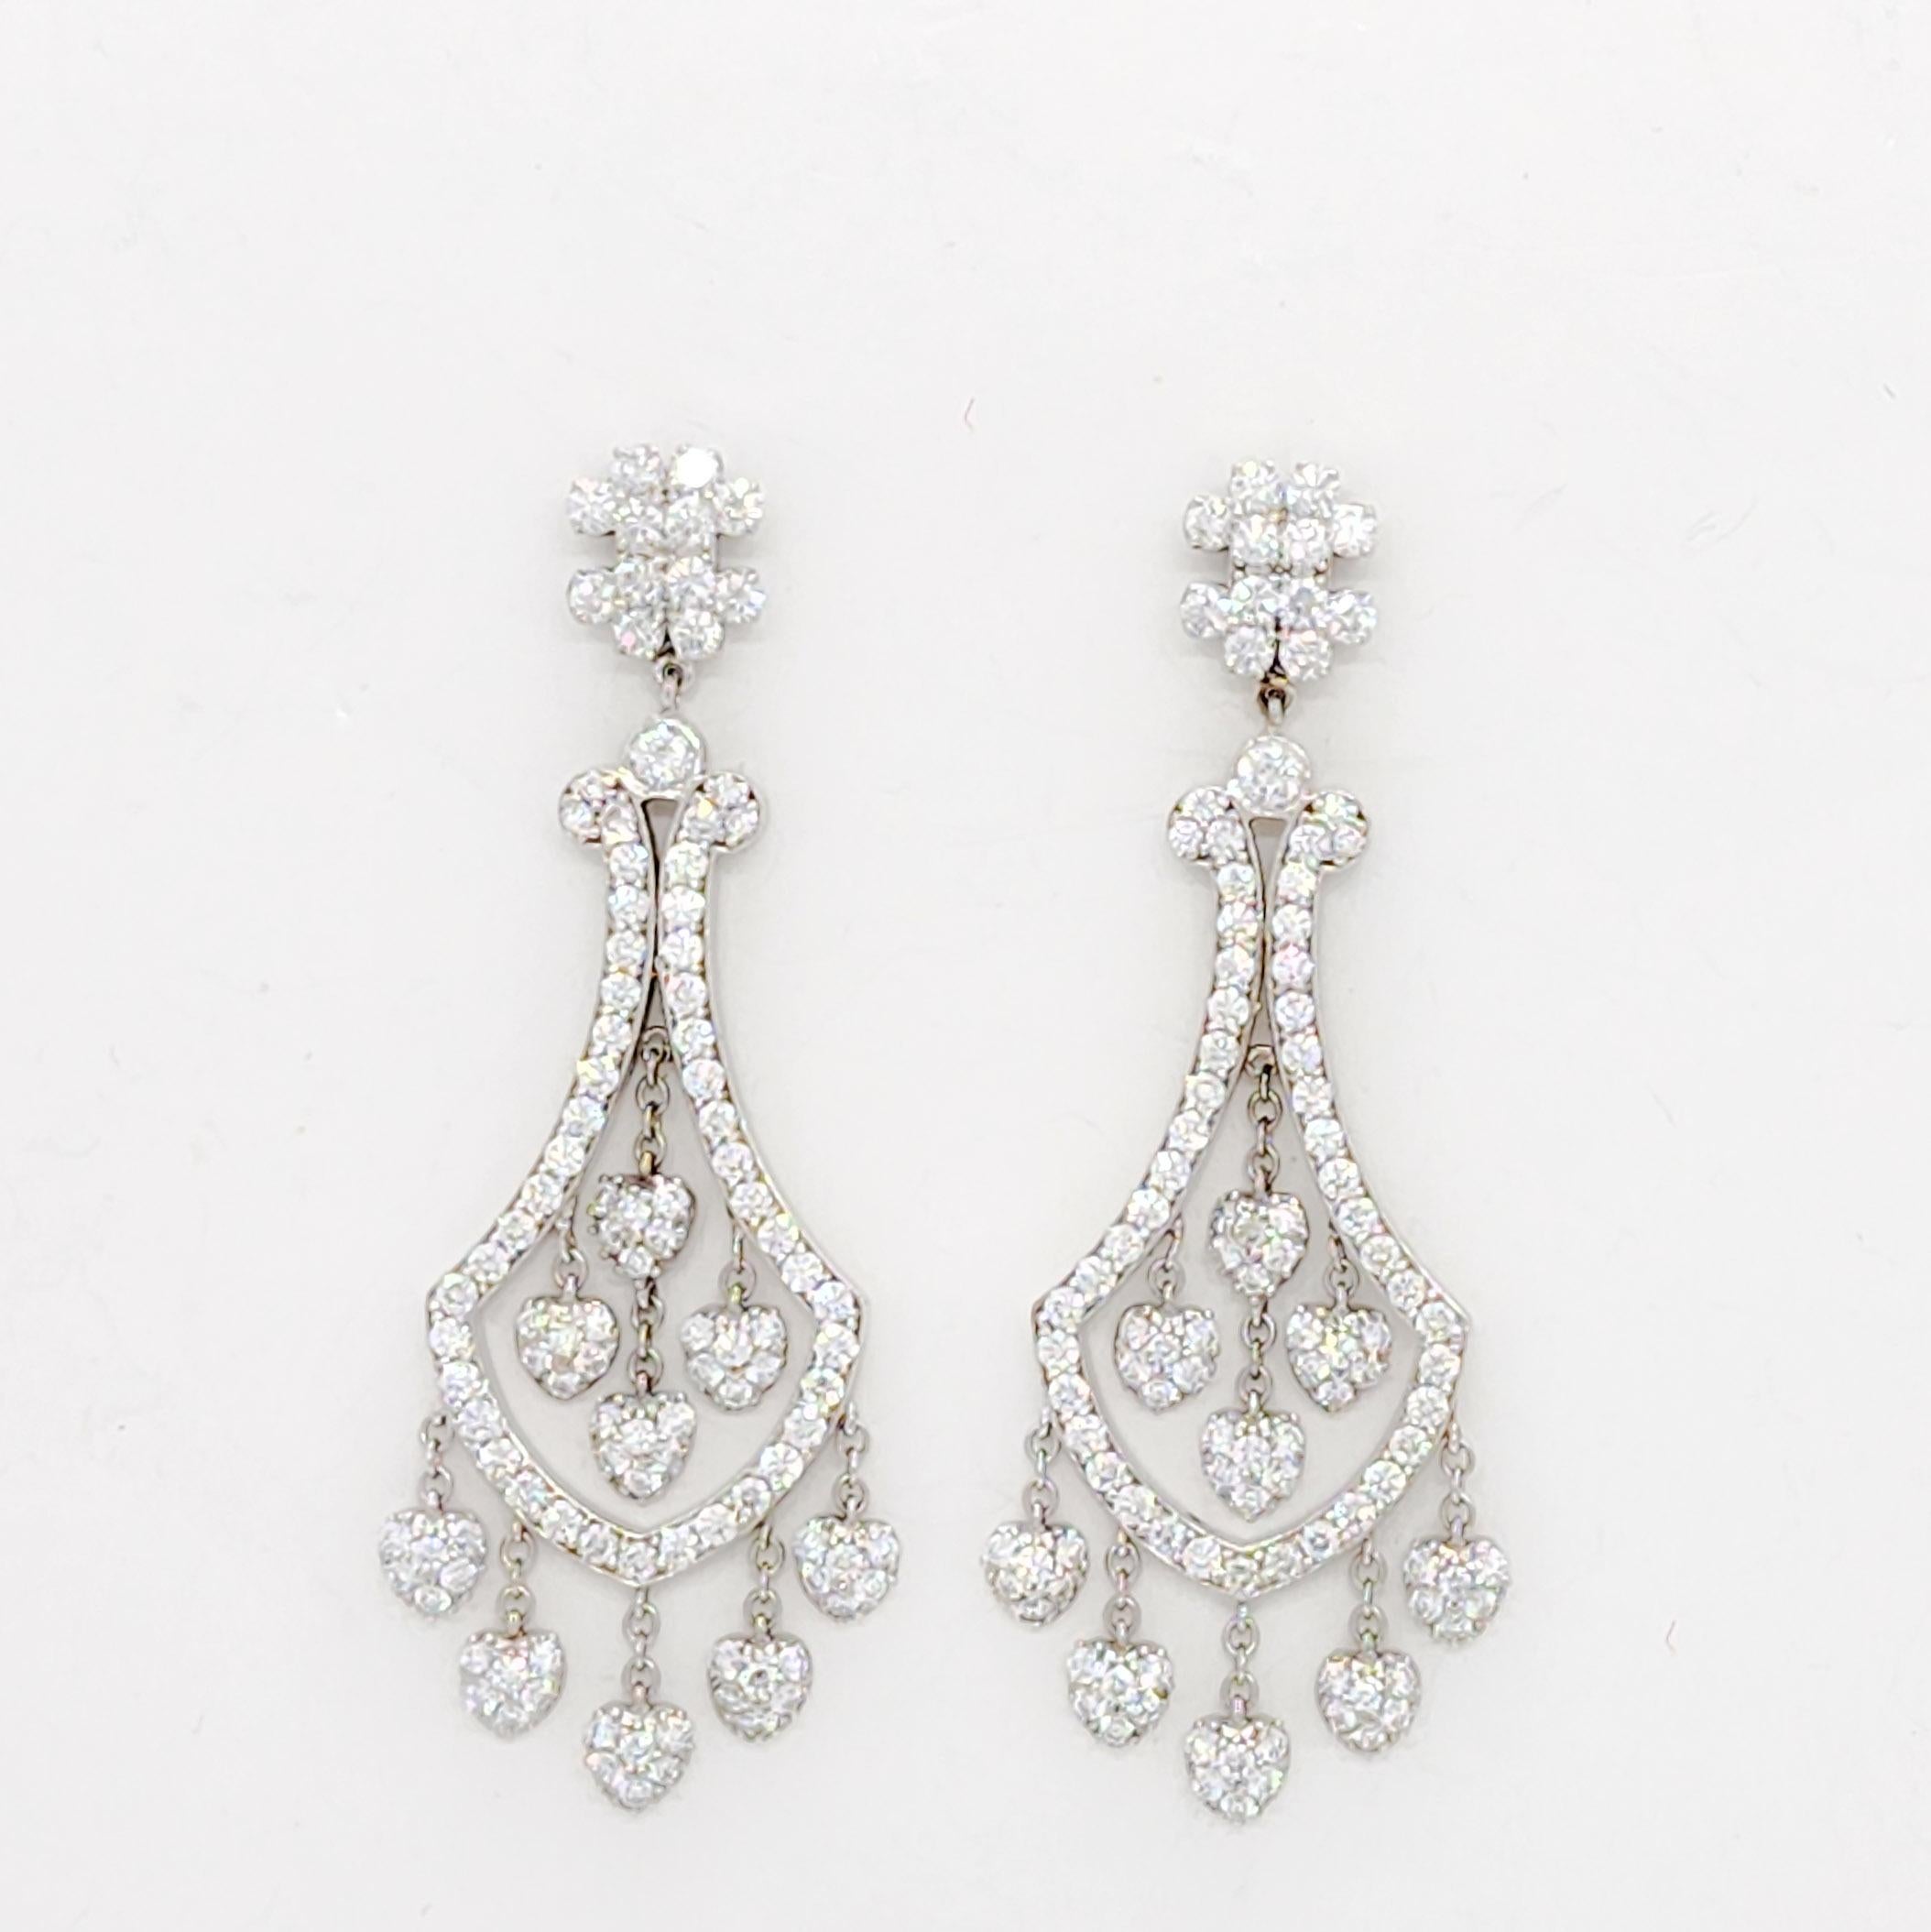 Beautiful white diamond dangle earrings with 214 stones weighing 5.00 ct.  Handmade in 18k white gold.